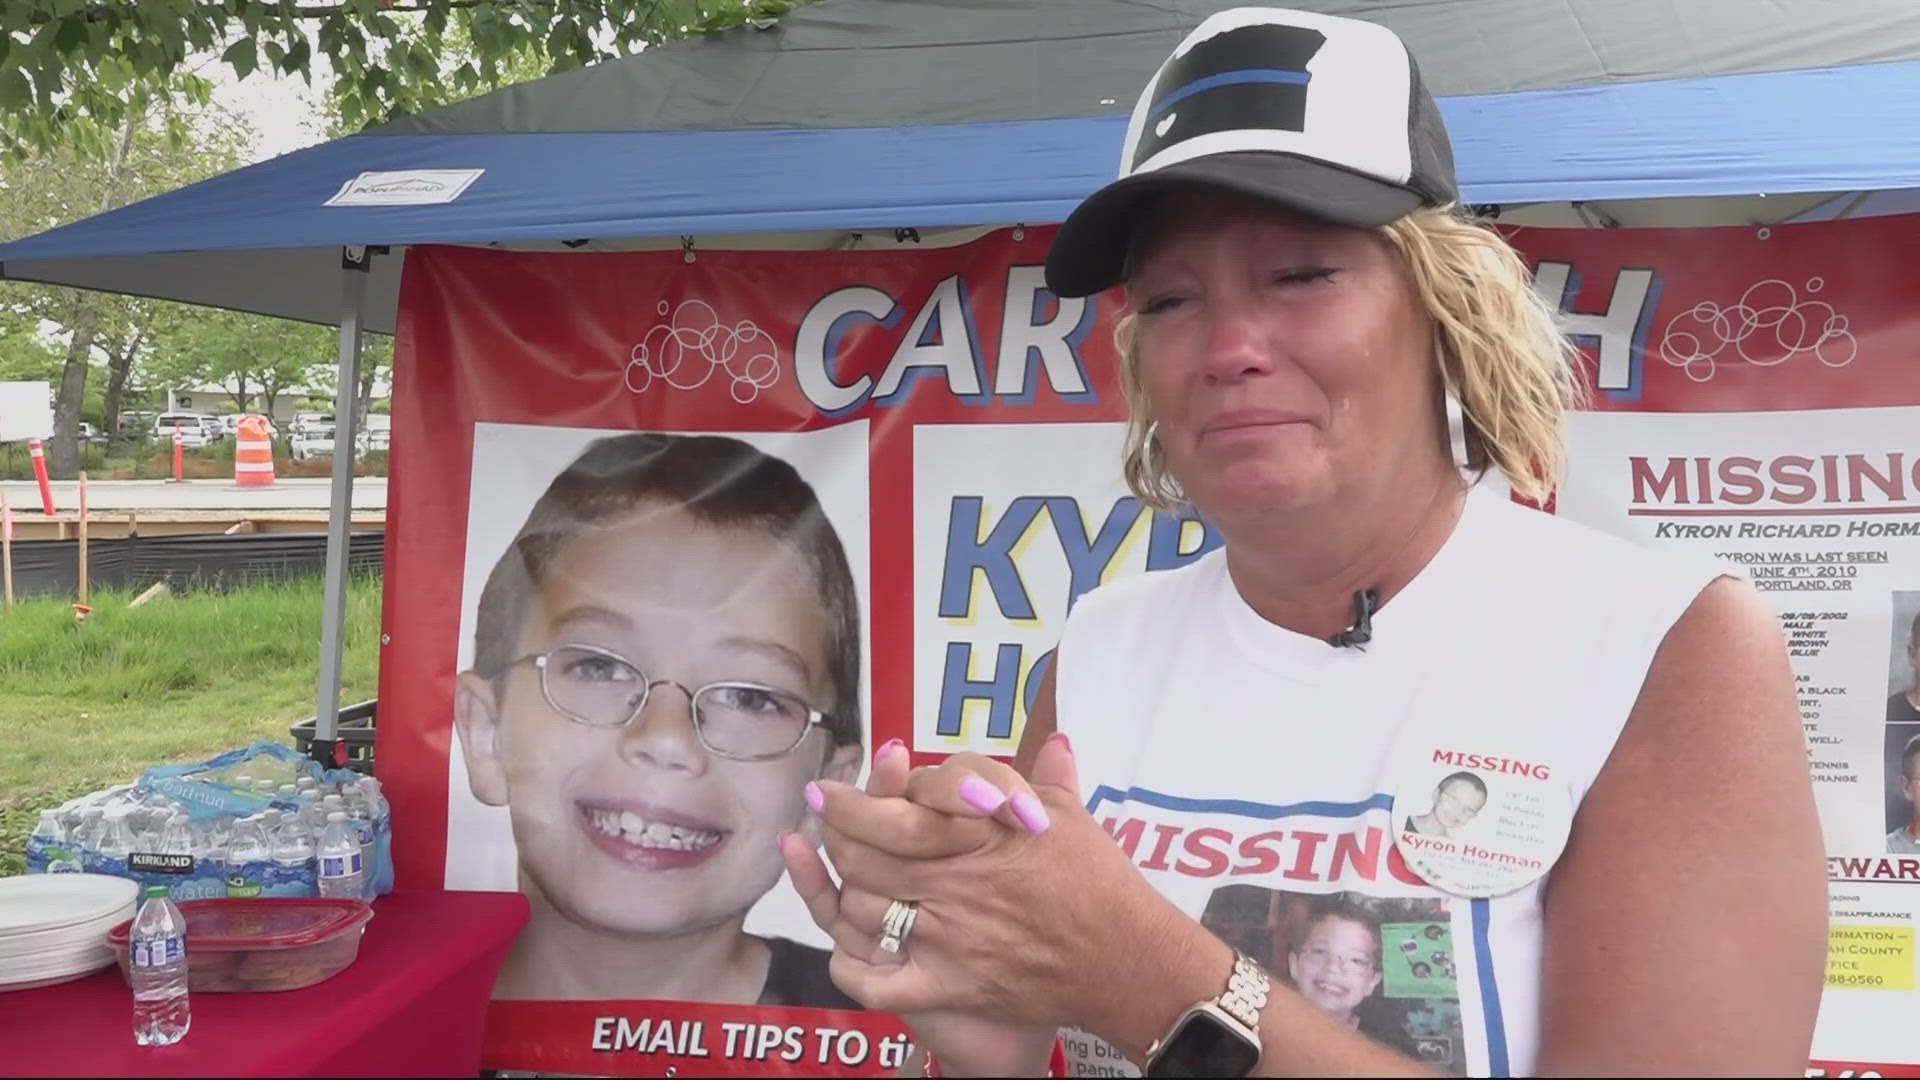 Kyron Horman disappeared from Skyline School in Northwest Portland on June 4, 2010. The second grader has never been found.